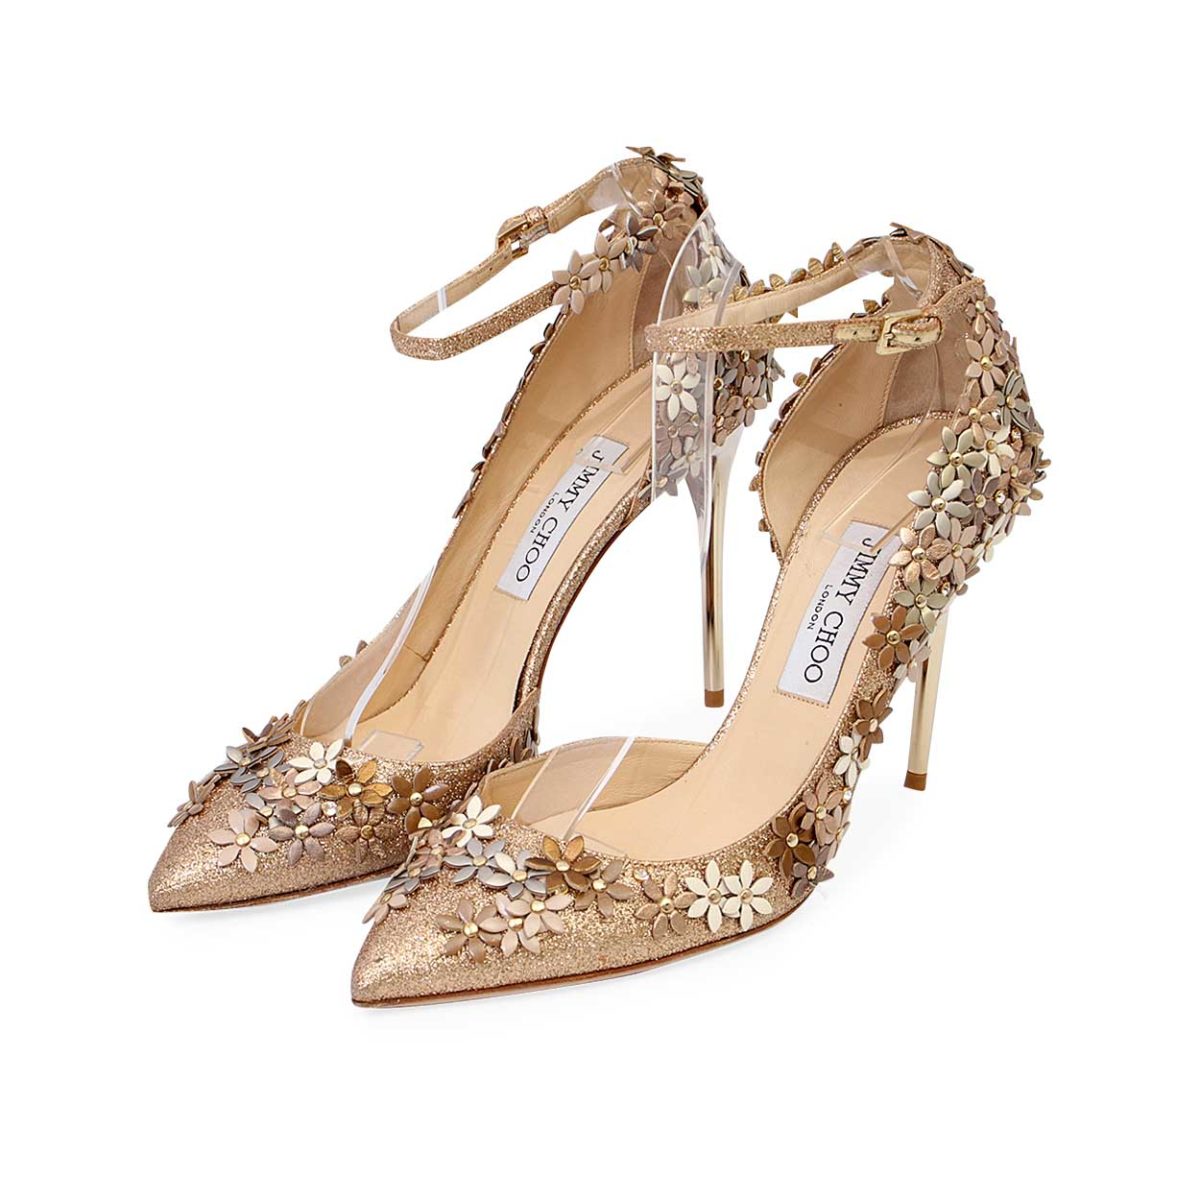 JIMMY CHOO Lorelai Floral Embellished Pumps Nude/Champagne - S: 40 (6.5 ...